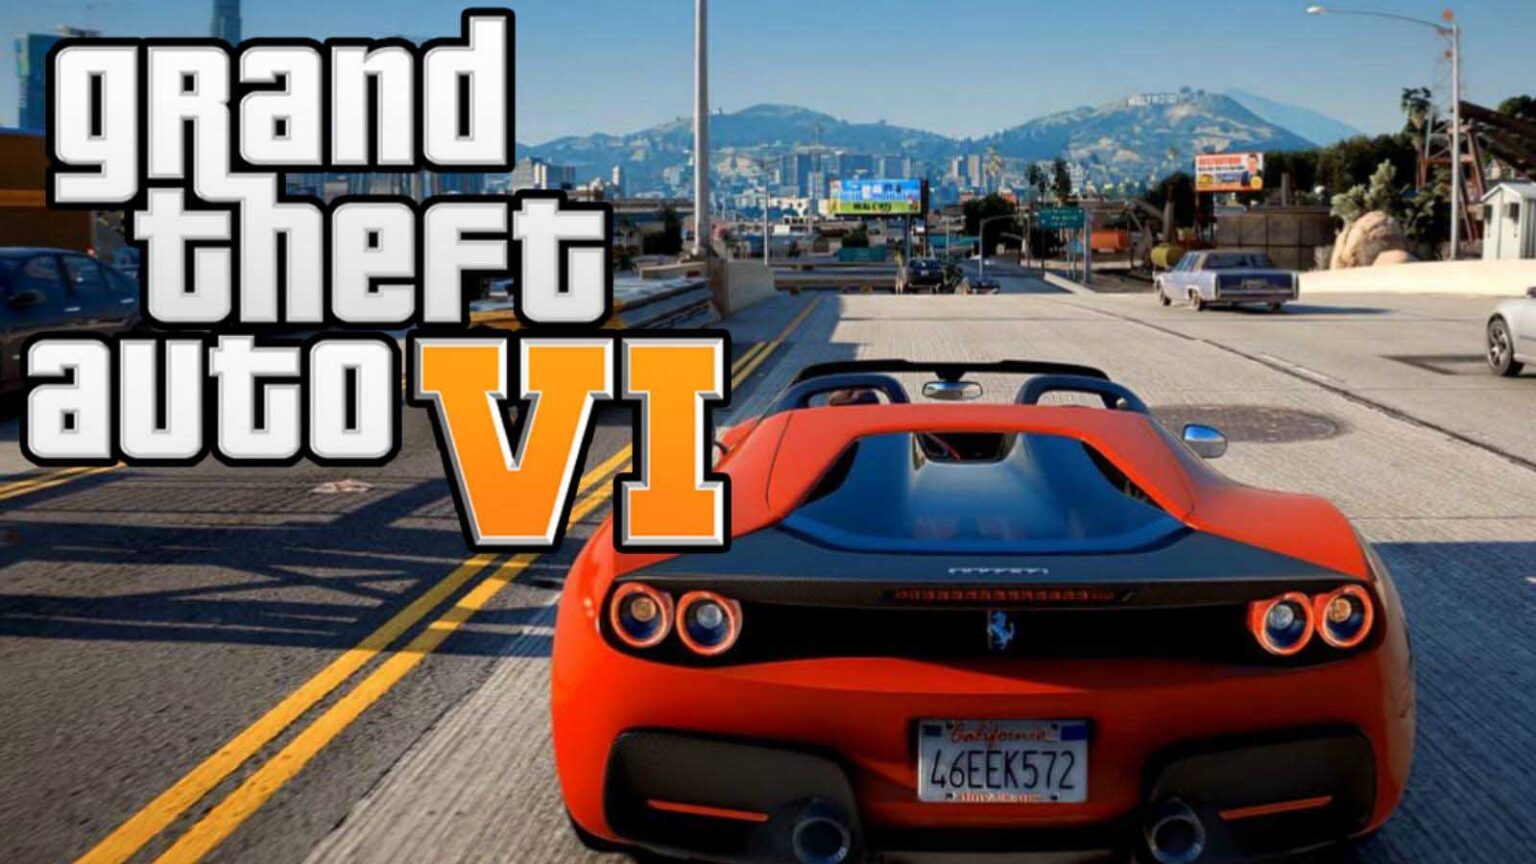 Rockstar, we want 'GTA 6' – not another 'GTA 5' update! Commiserate with these hilarious Twitter reactions.